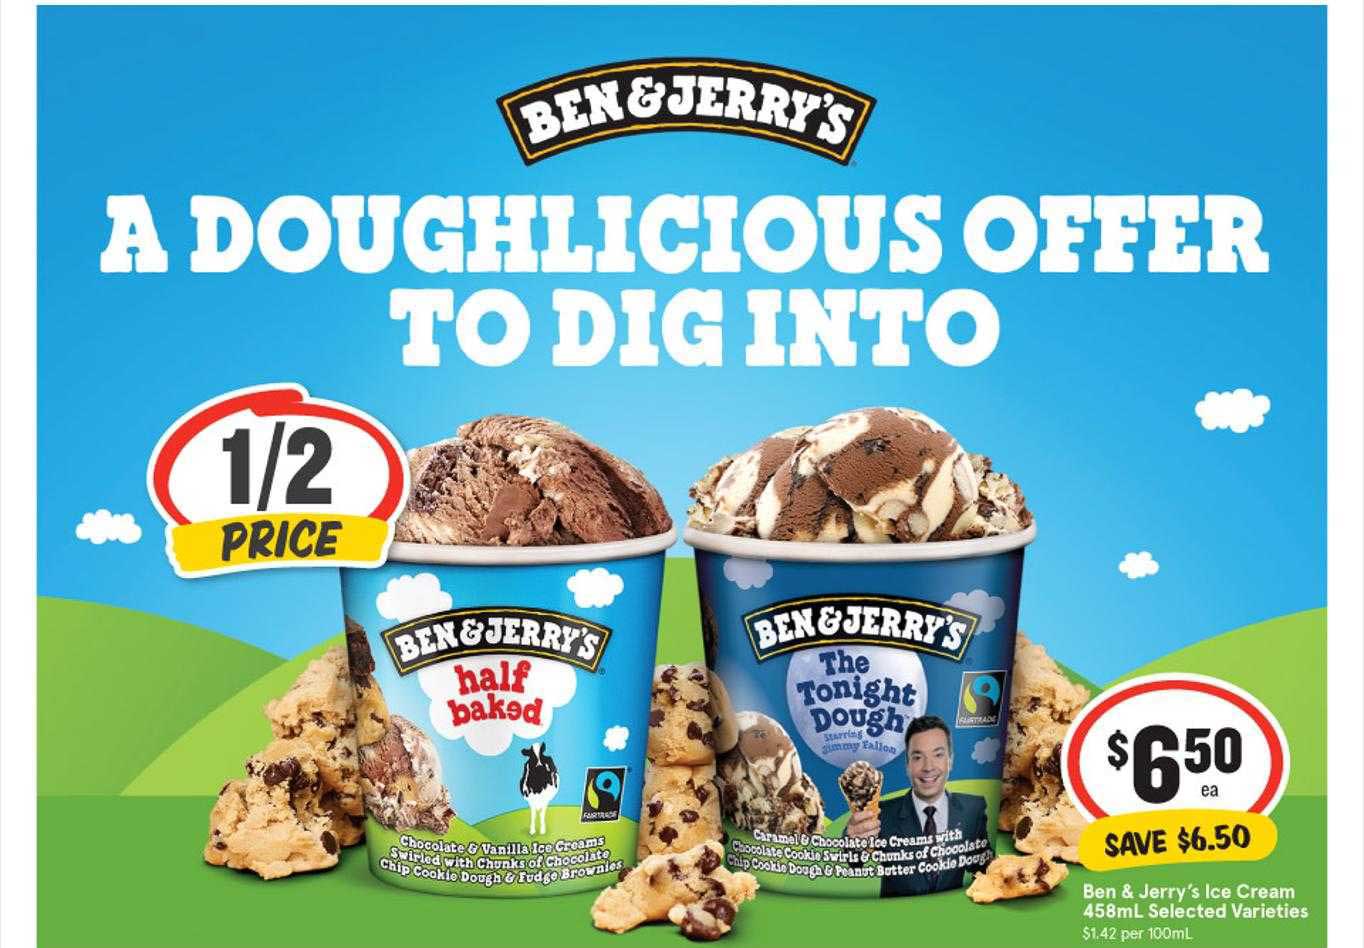 Ben & Jerry's Ice Cream Selected Varieties Offer at IGA